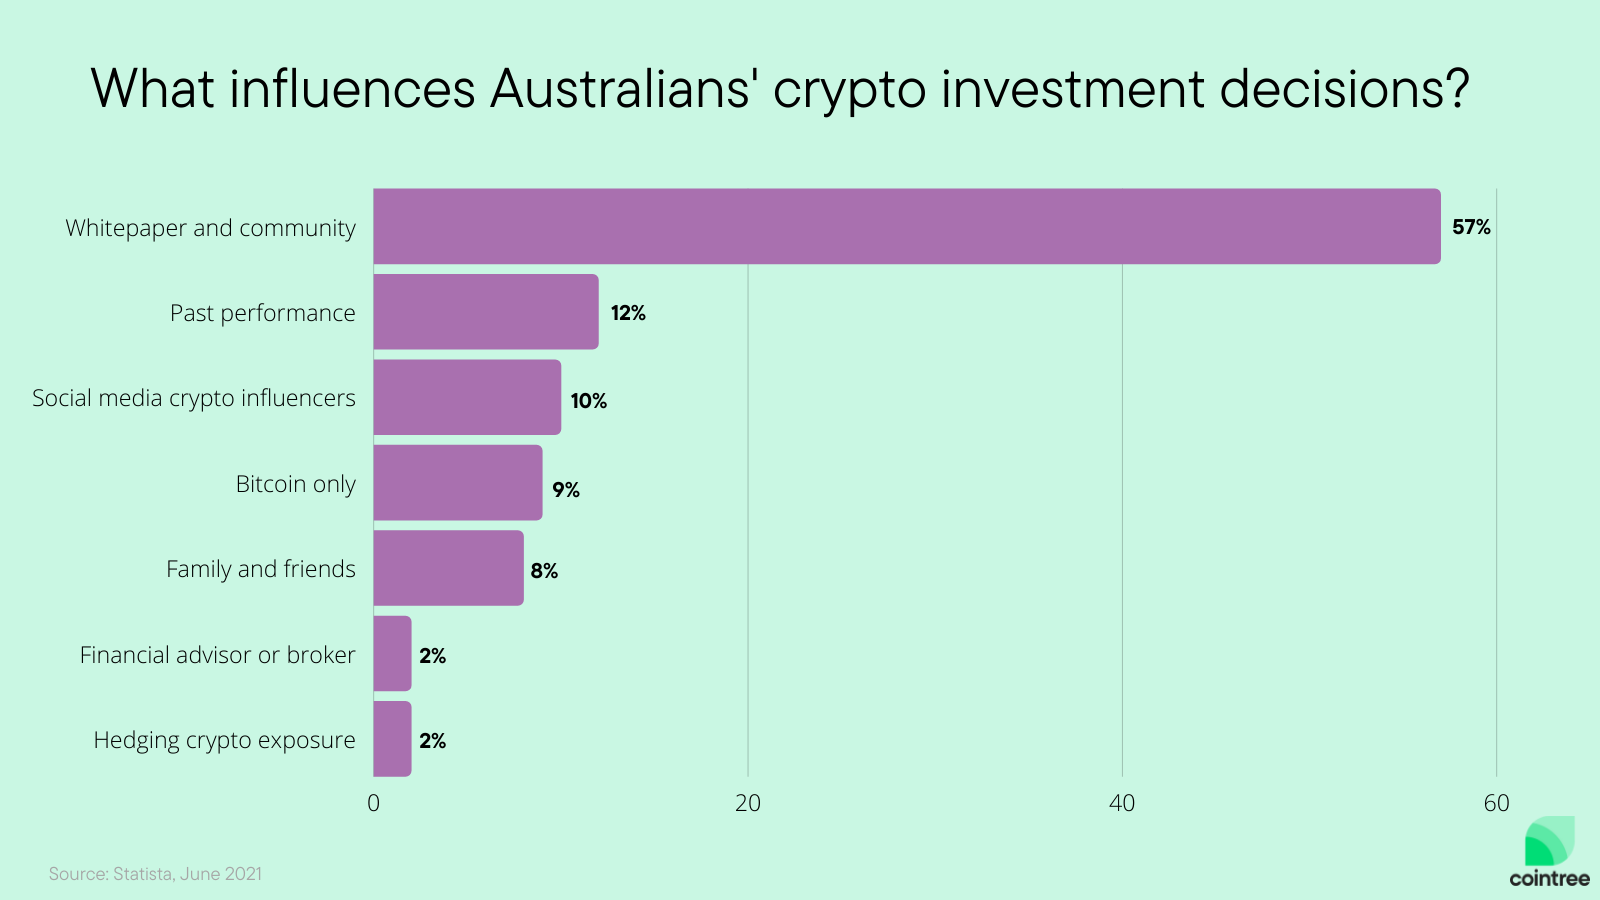 The whitepaper and community engagement are the most important factors when Australians are investing in crypto.